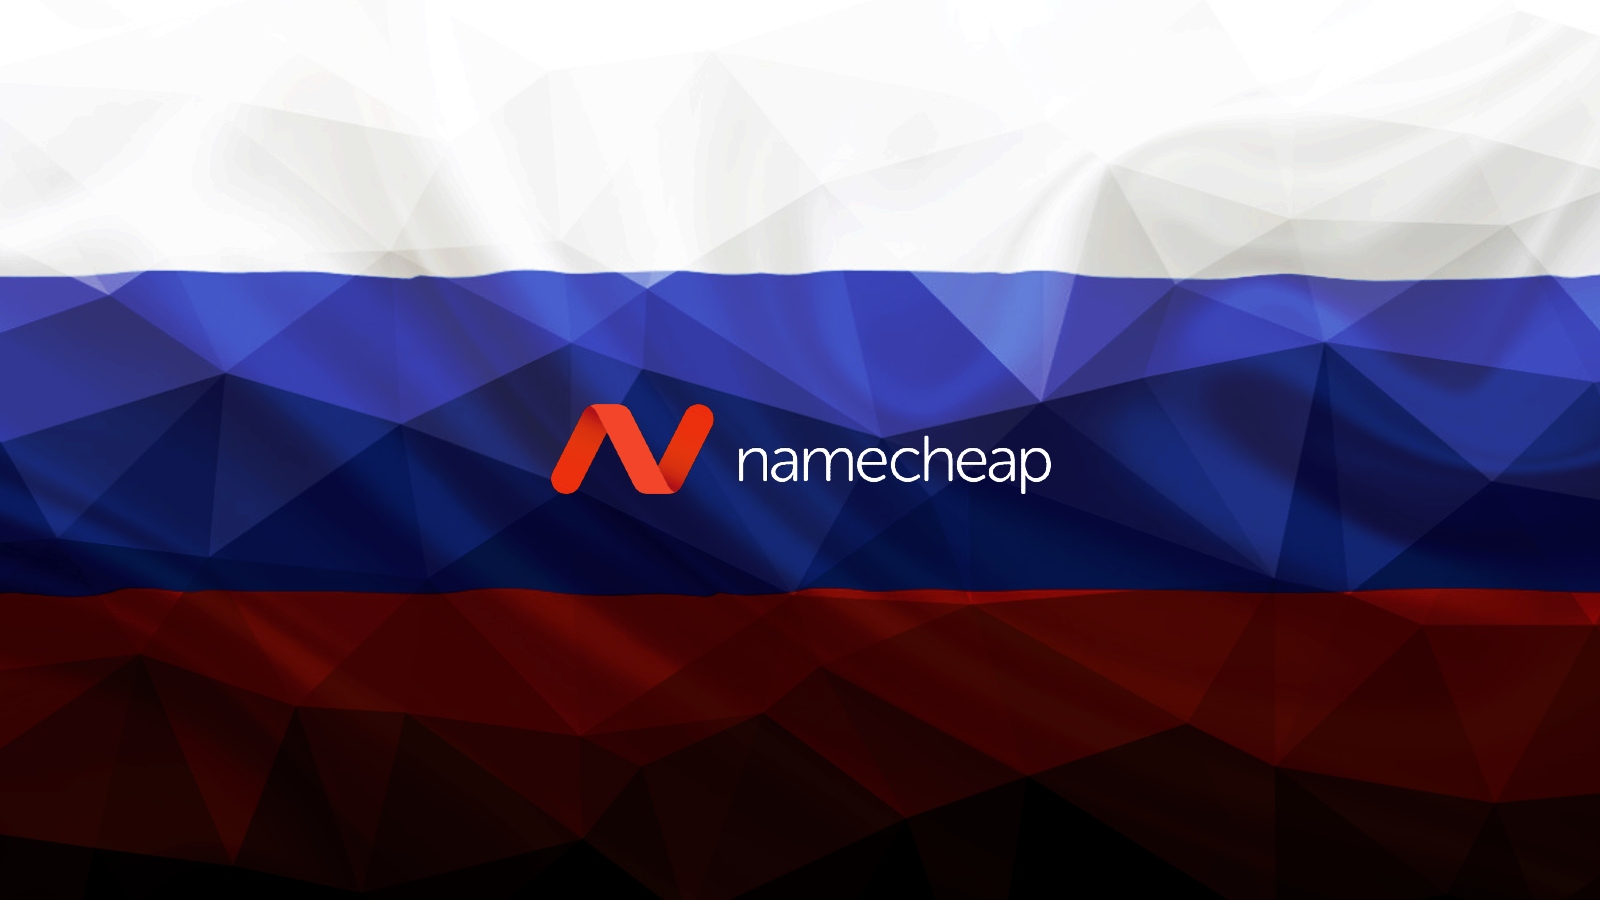 Namecheap offers free anonymous hosting, domains for anti-Putin sites